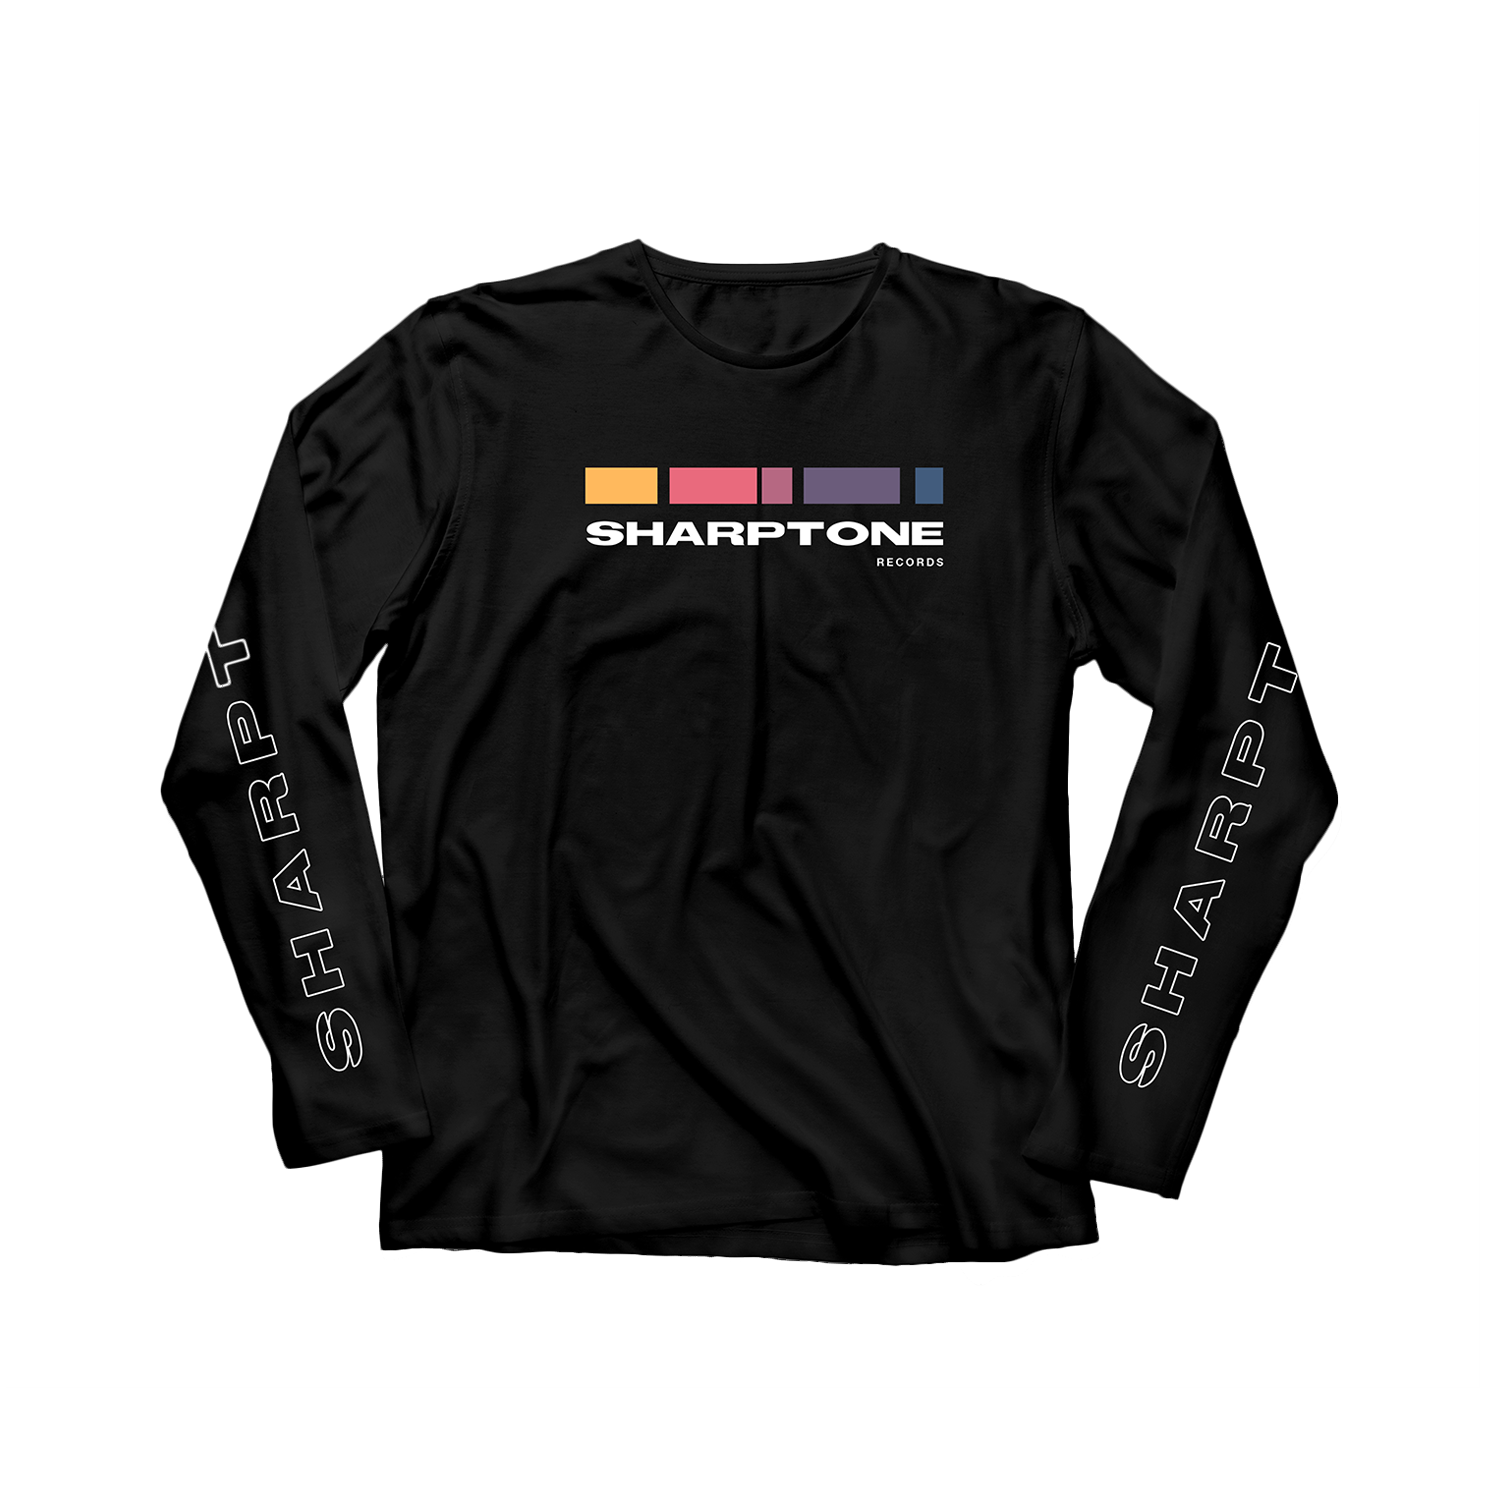 SharpTone Records - Color Block Long Sleeve